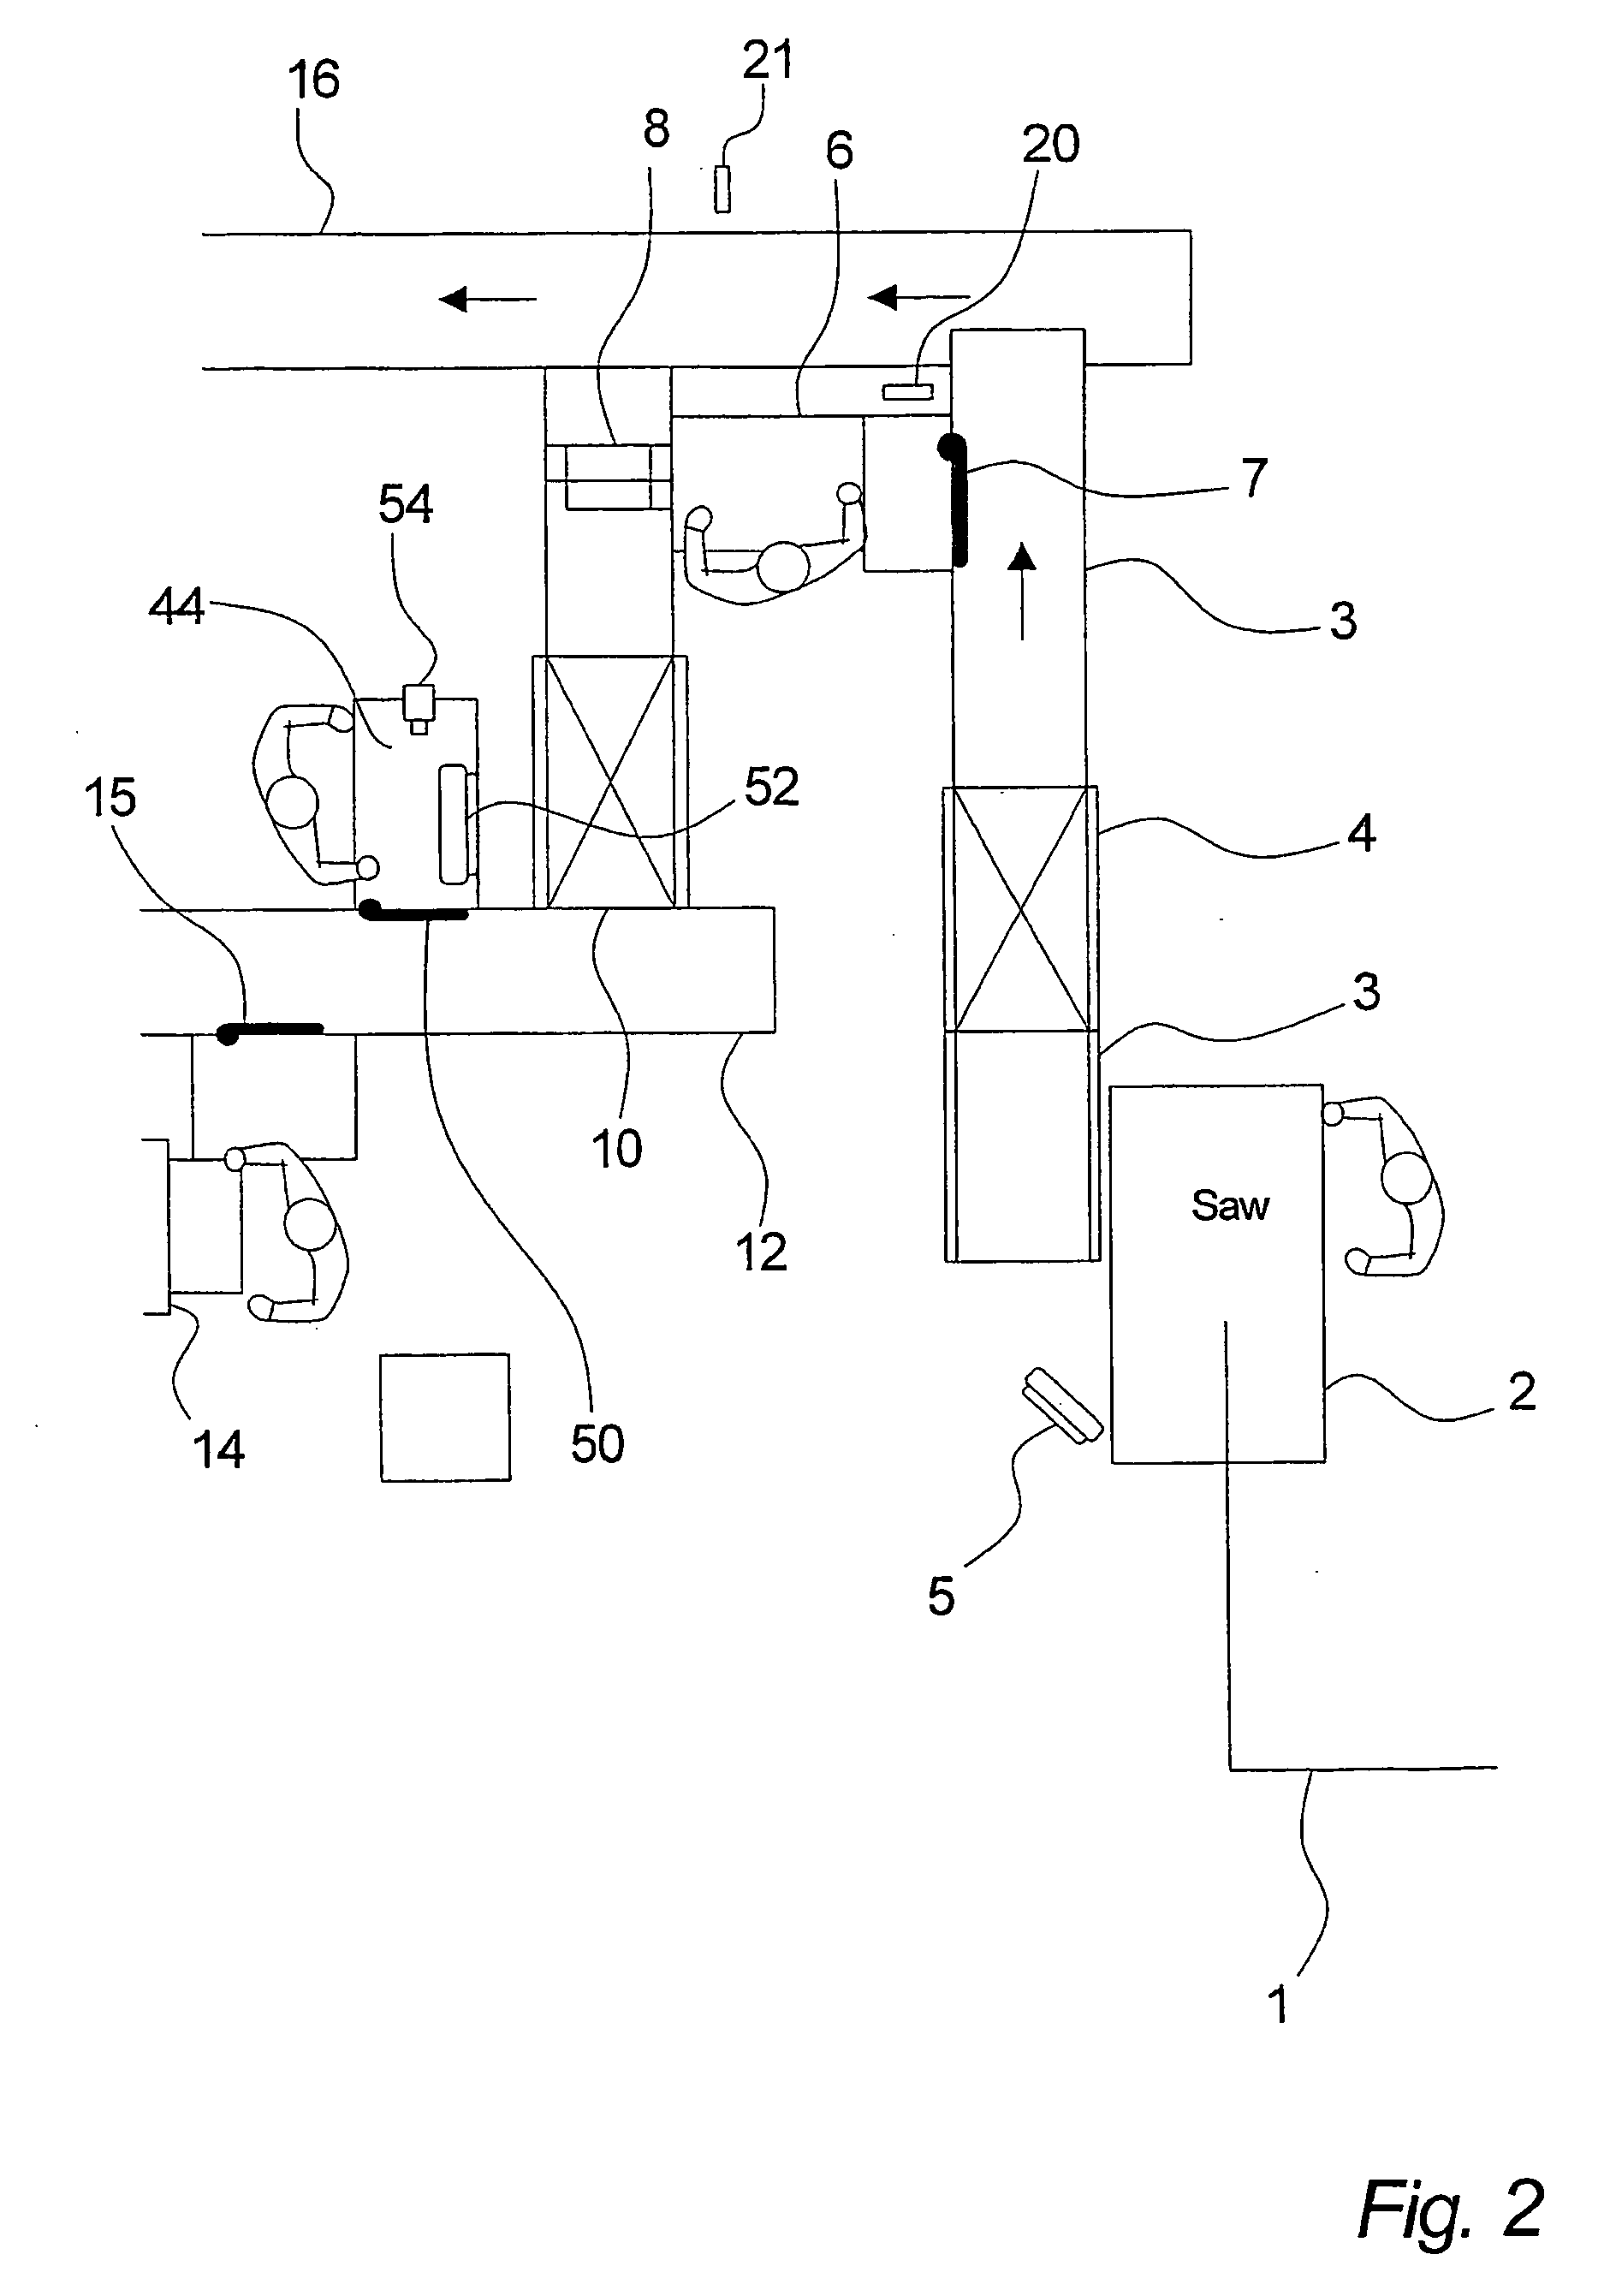 Method and system for monitoring the processing of items